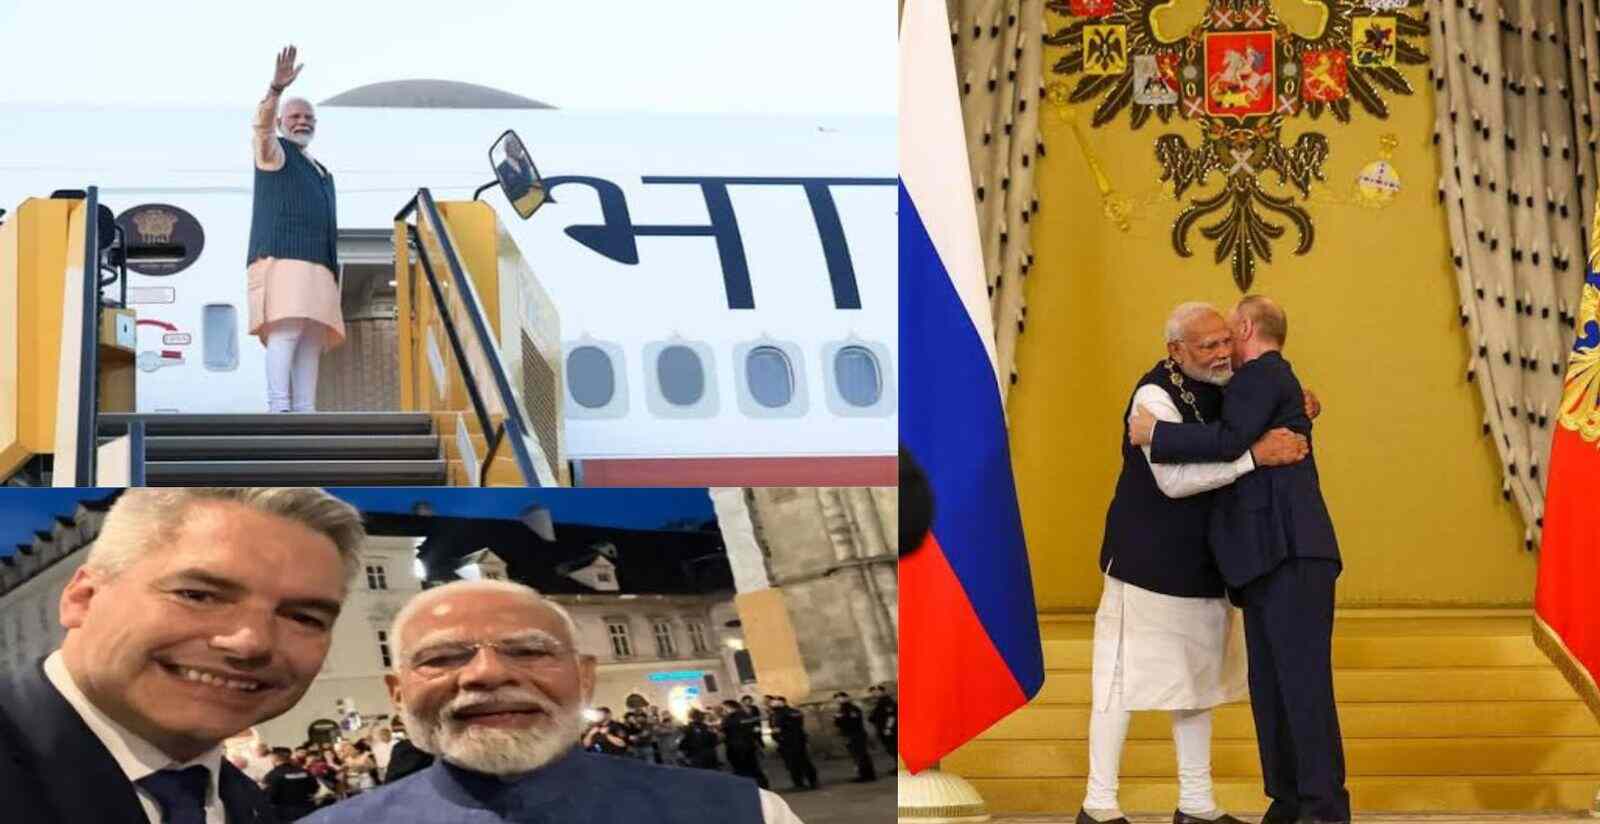 Prime Minister Modi Wraps Up Visits to Austria and Russia